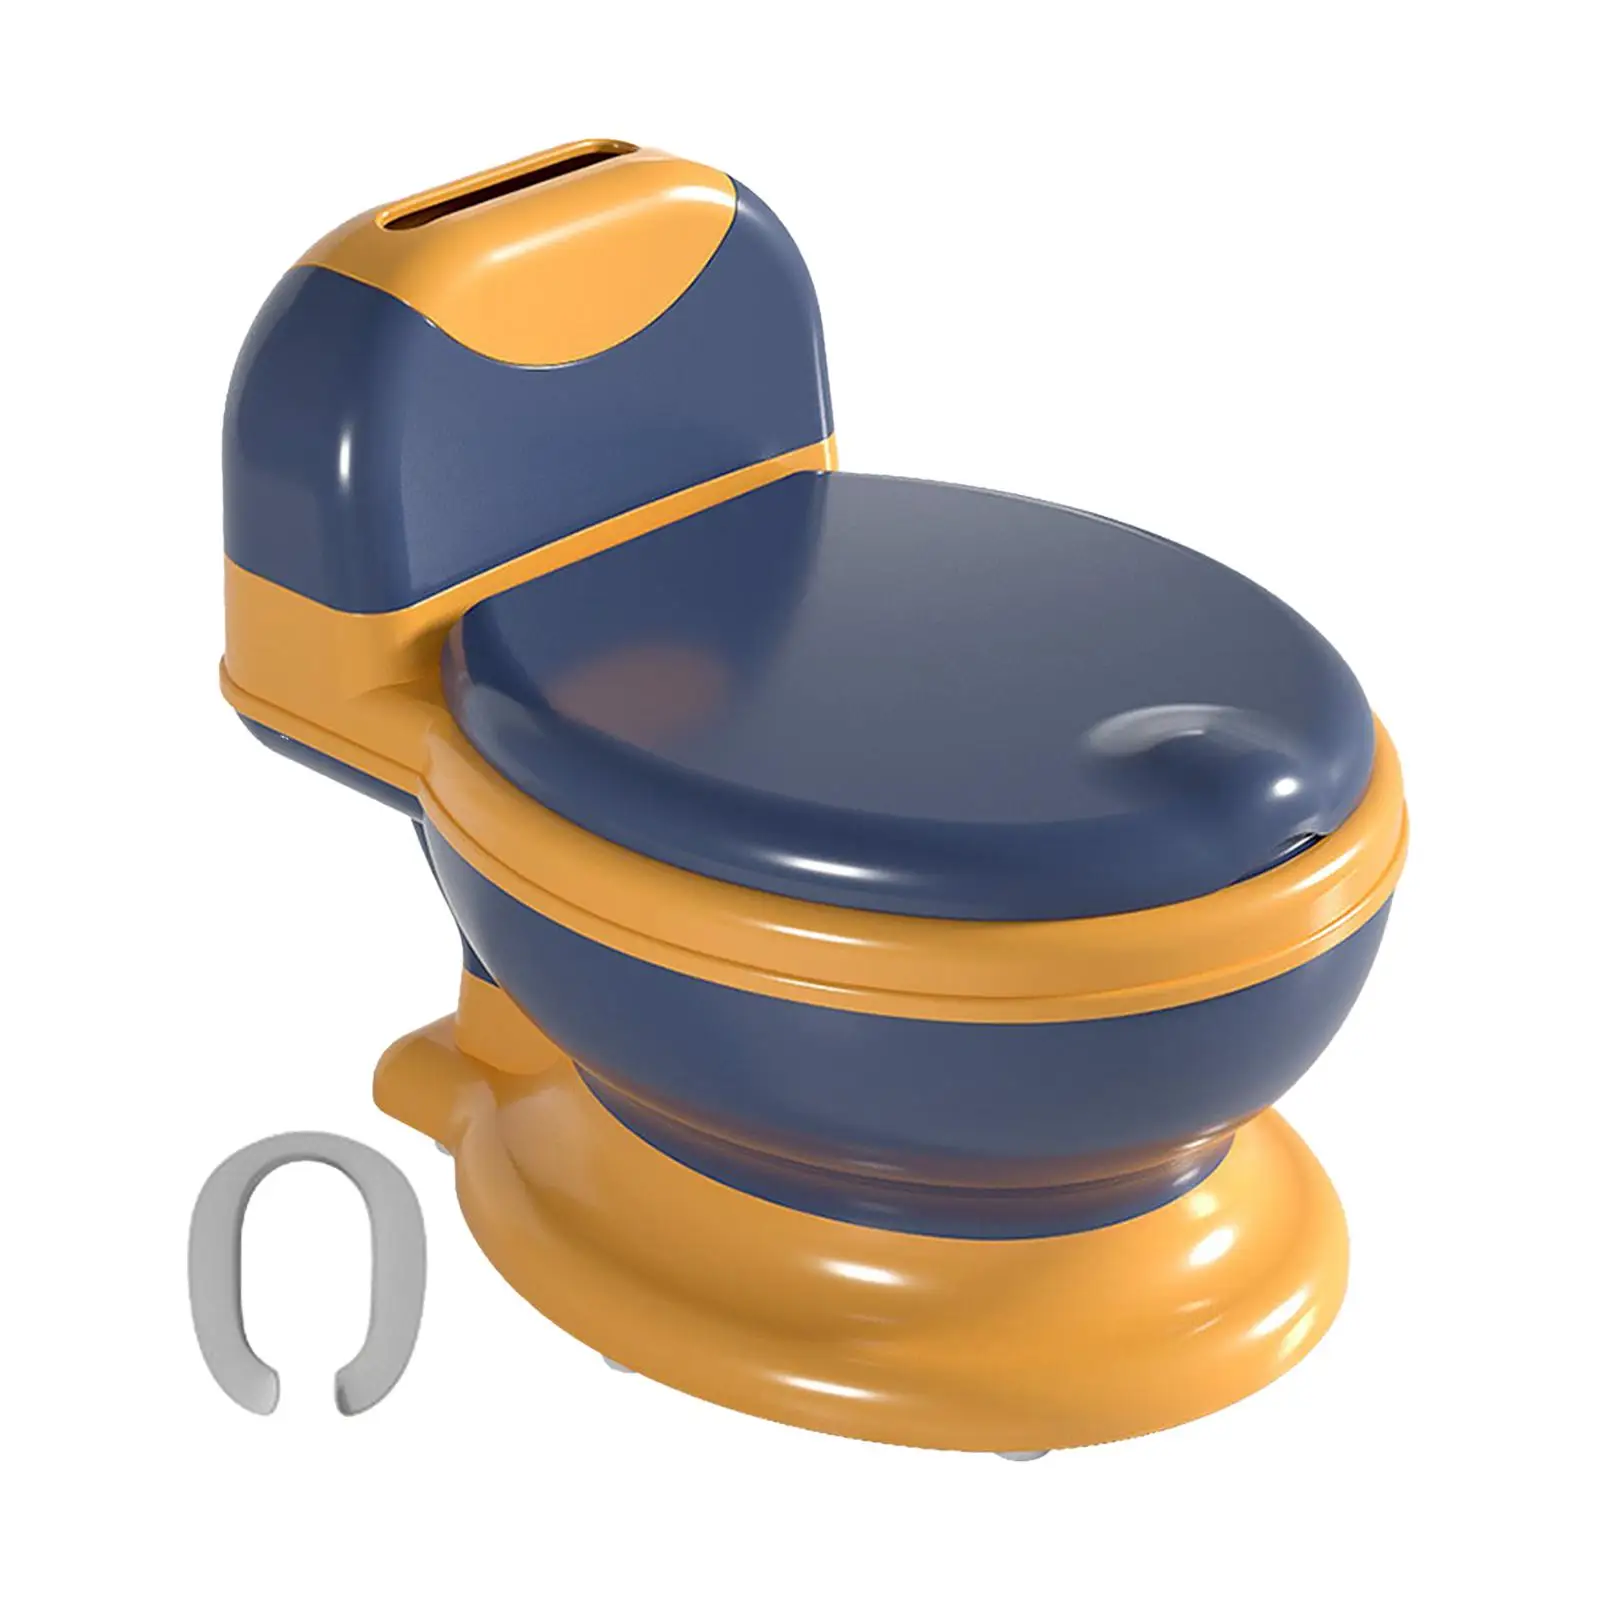 Potty Train Toilet Portable Potty Train Seat Comfortable Detachable Real Feel Potty for Baby Toddlers Kids Girls Children